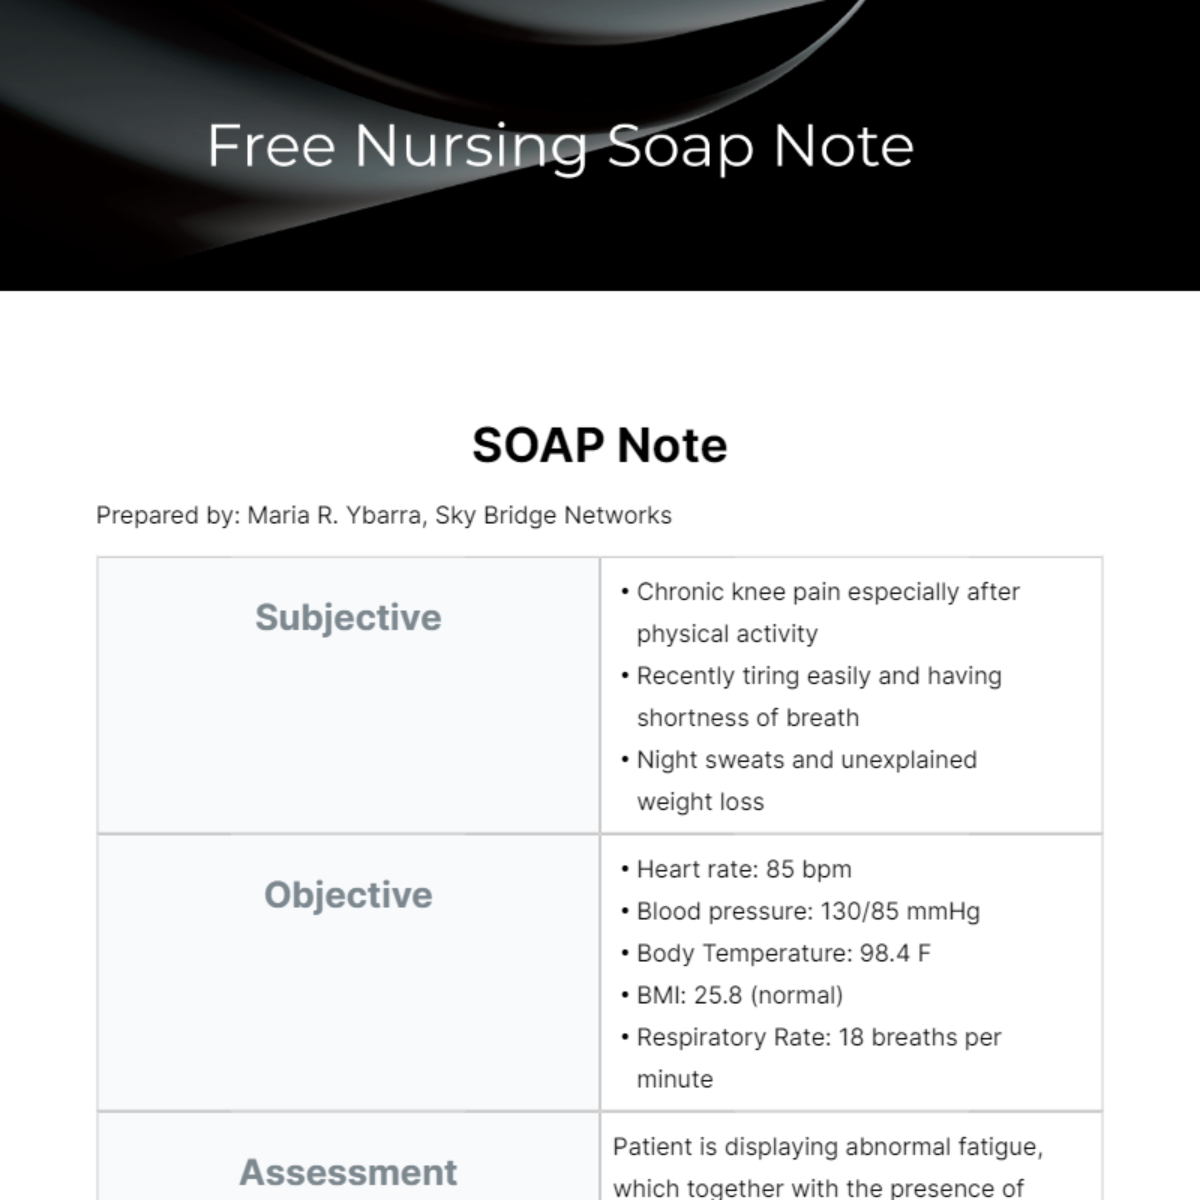 FREE SOAP Note Templates Templates & Examples - Edit Online & Download ...